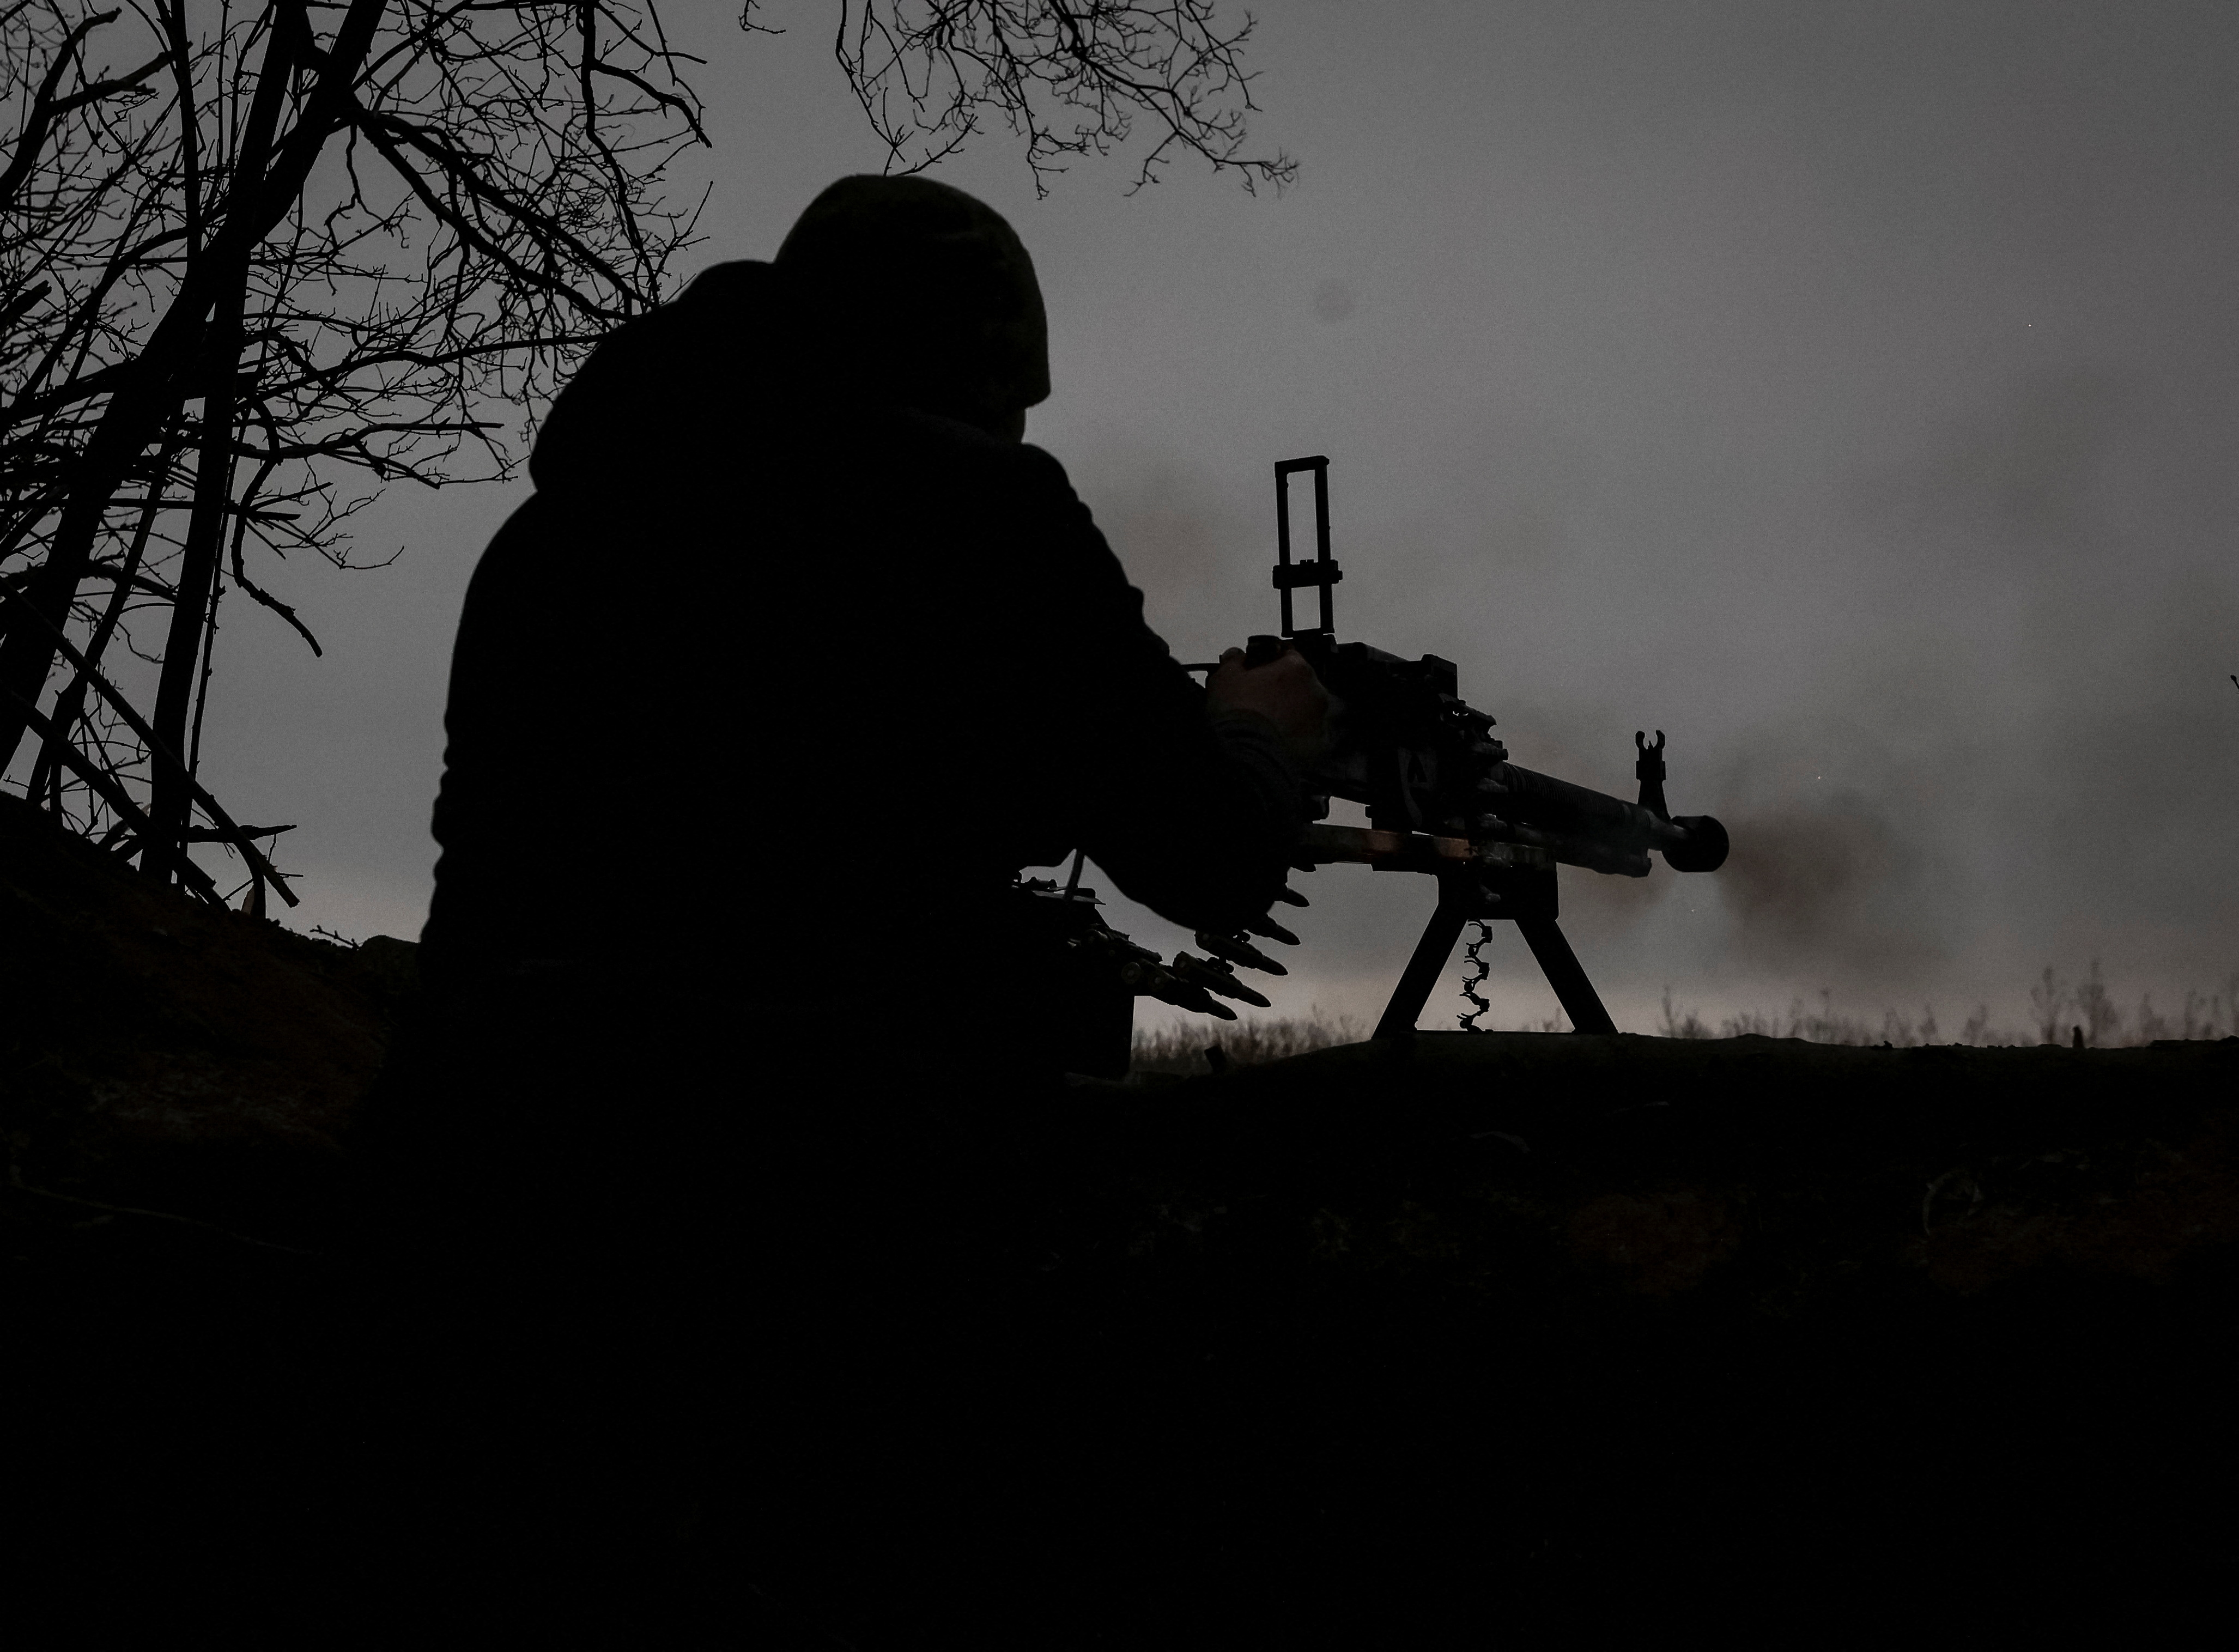 A Ukrainian service member fires a machine gun at a position on the front line near the town of Soledar